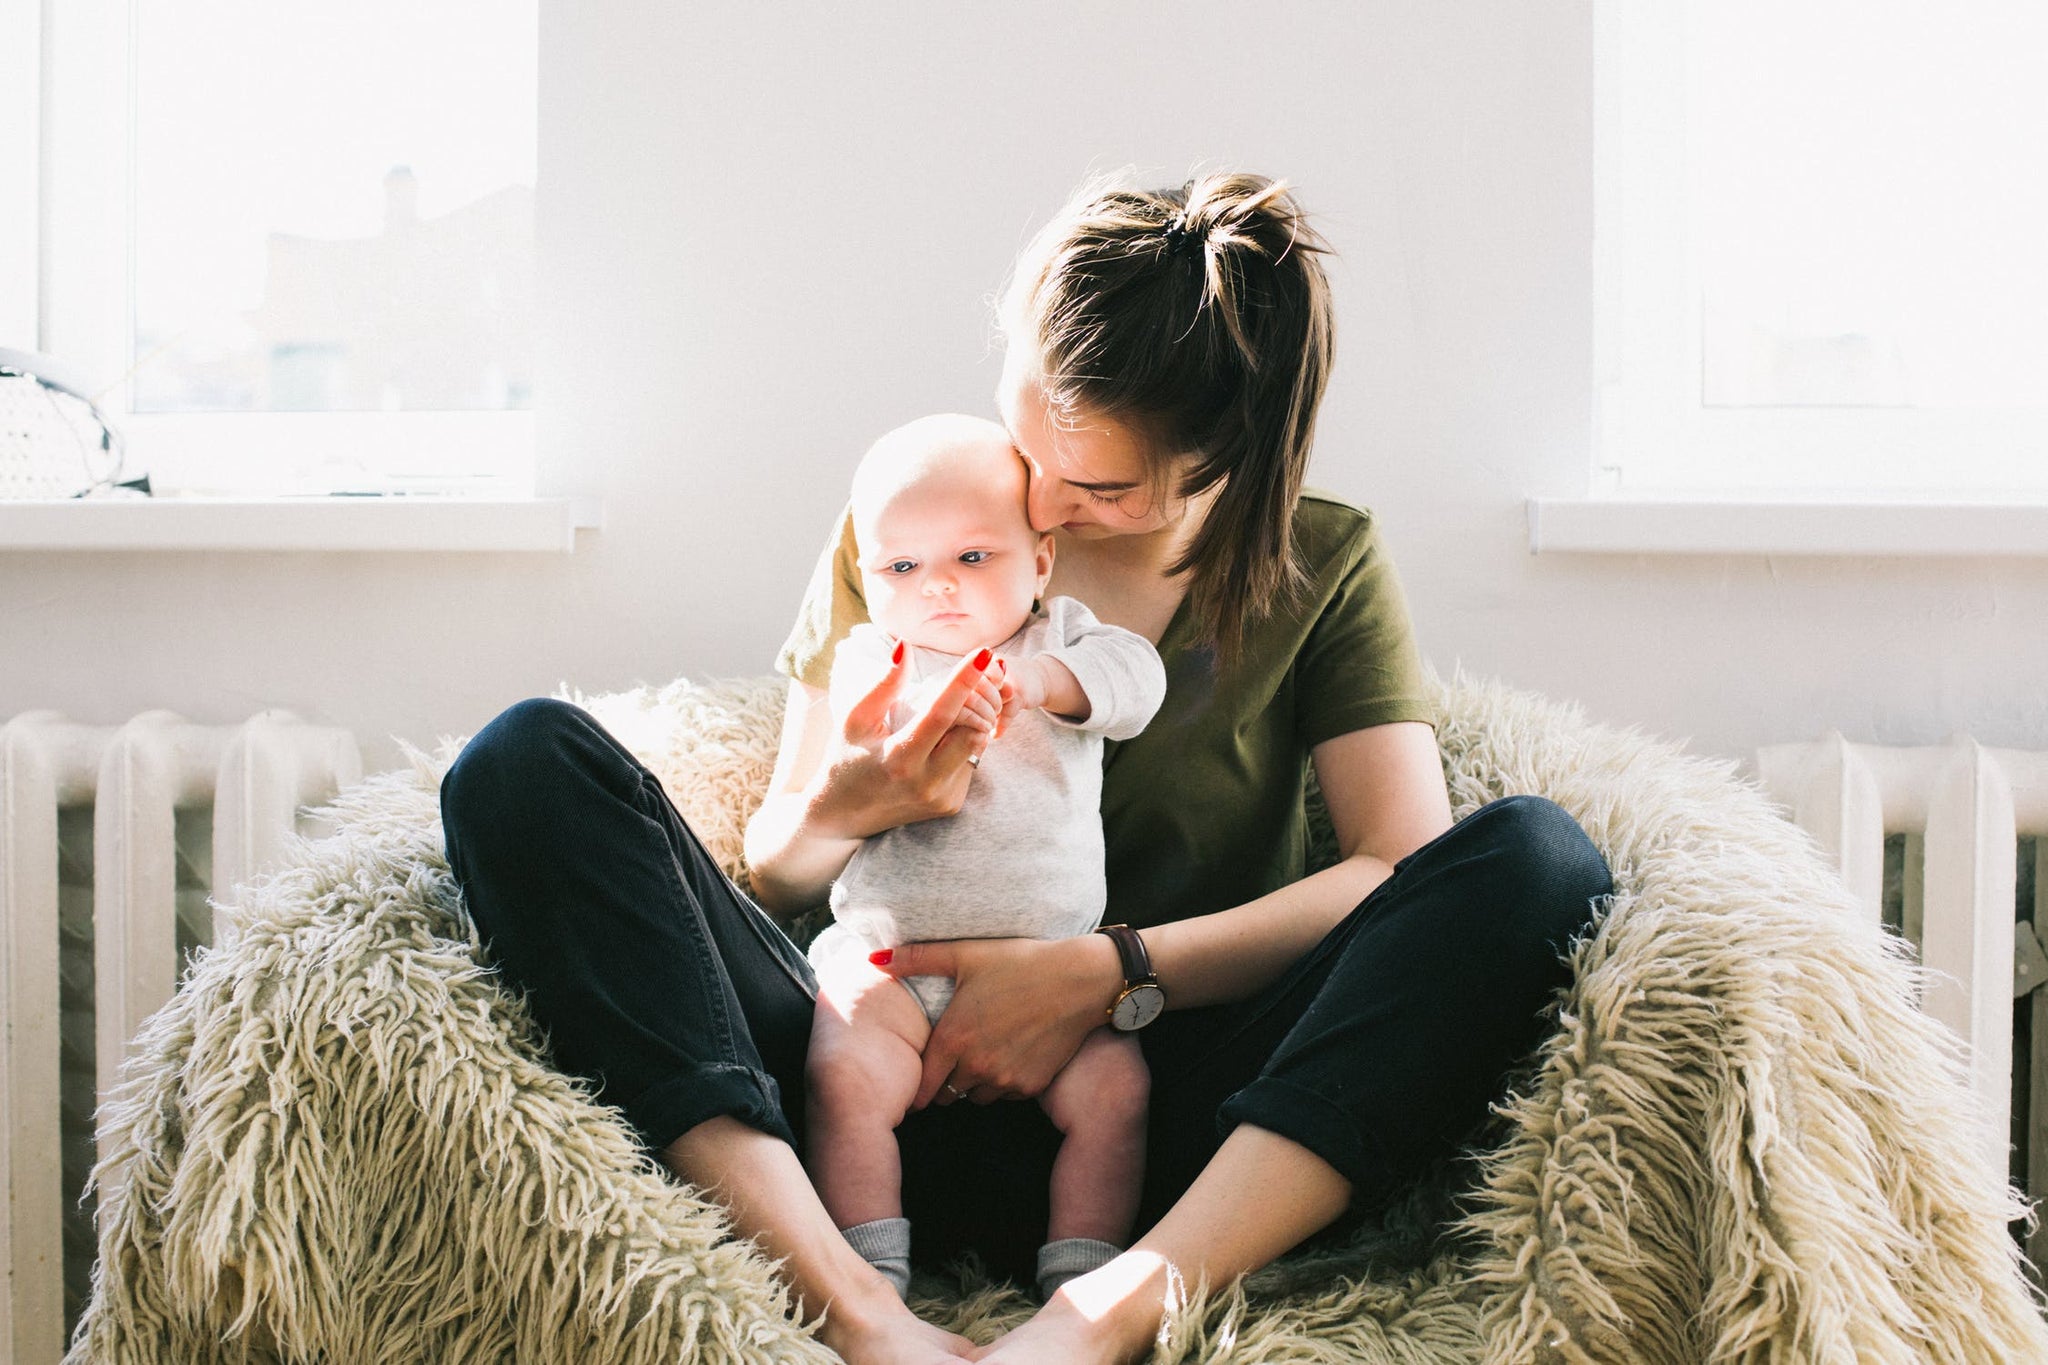 How to Make Money on Maternity Leave?